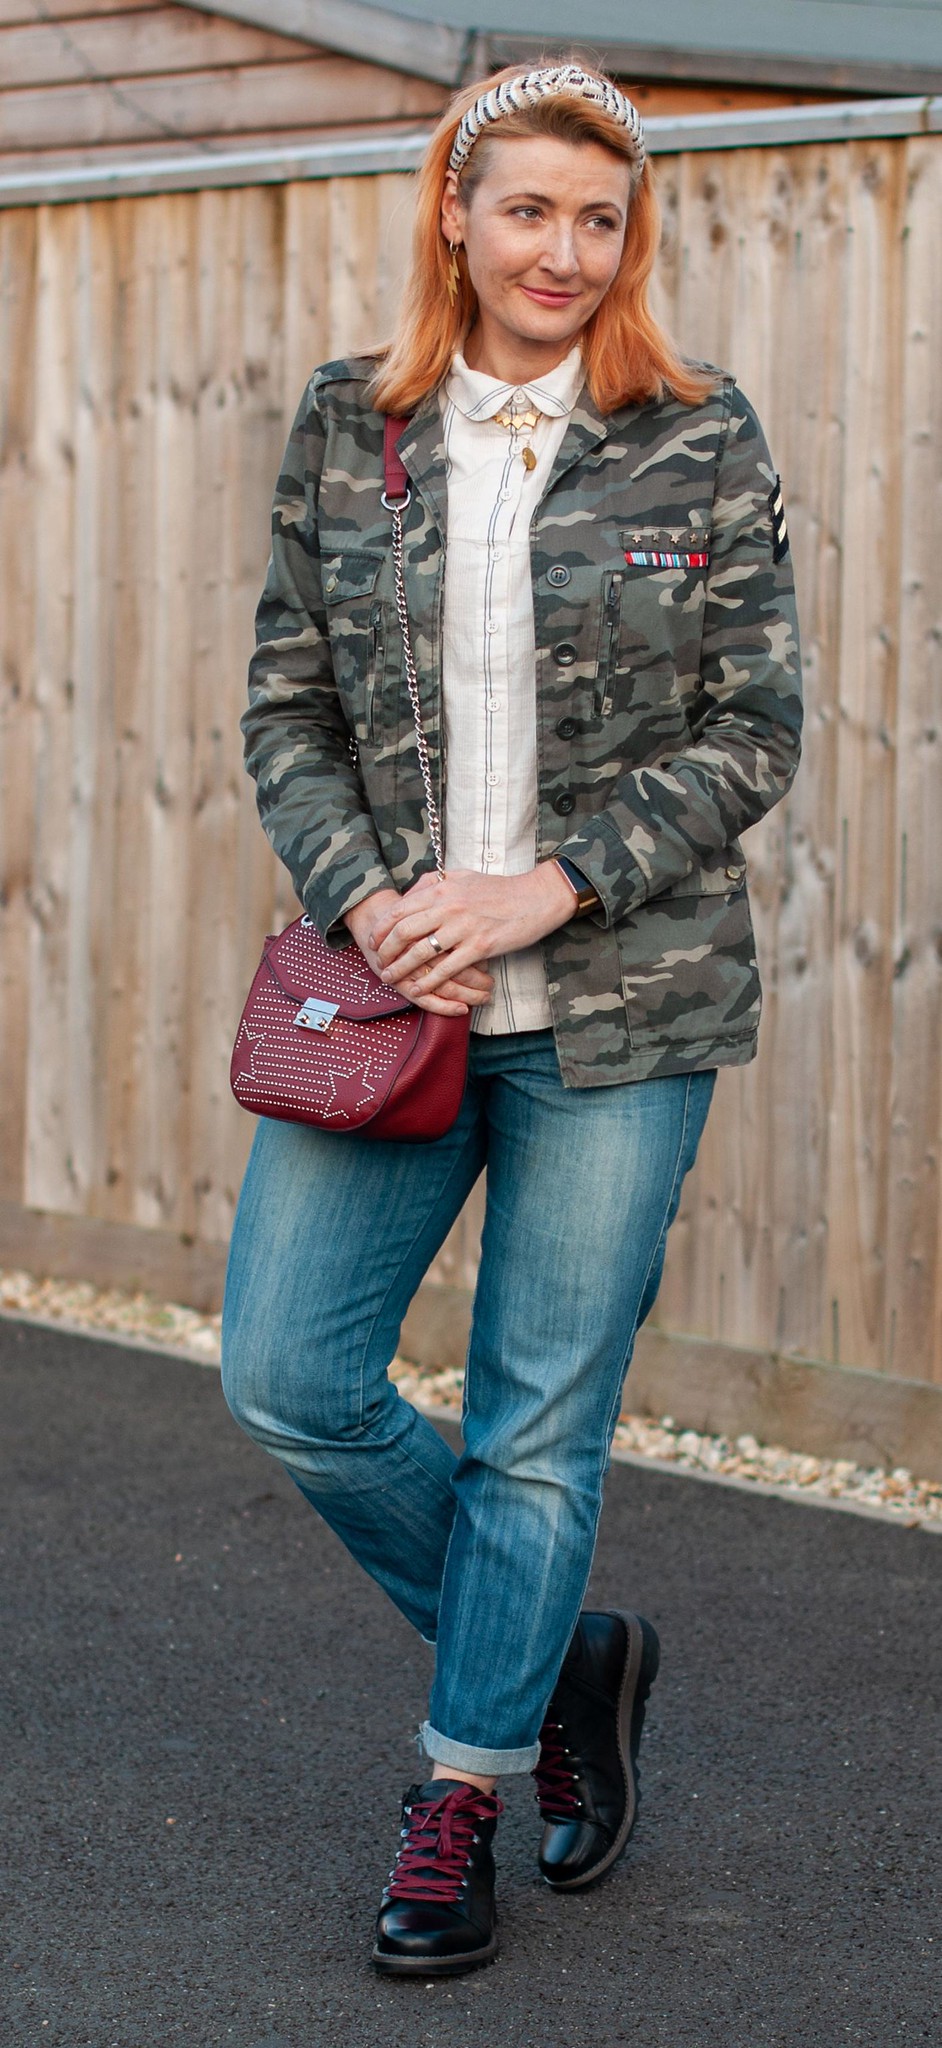 How to Do Masculine Chic With Denim, Camo and Military-Style Boots (Josef Seibel Lina 09 Boots, AW19) by Not Dressed As Lamb, over 40 fashion and style blogger